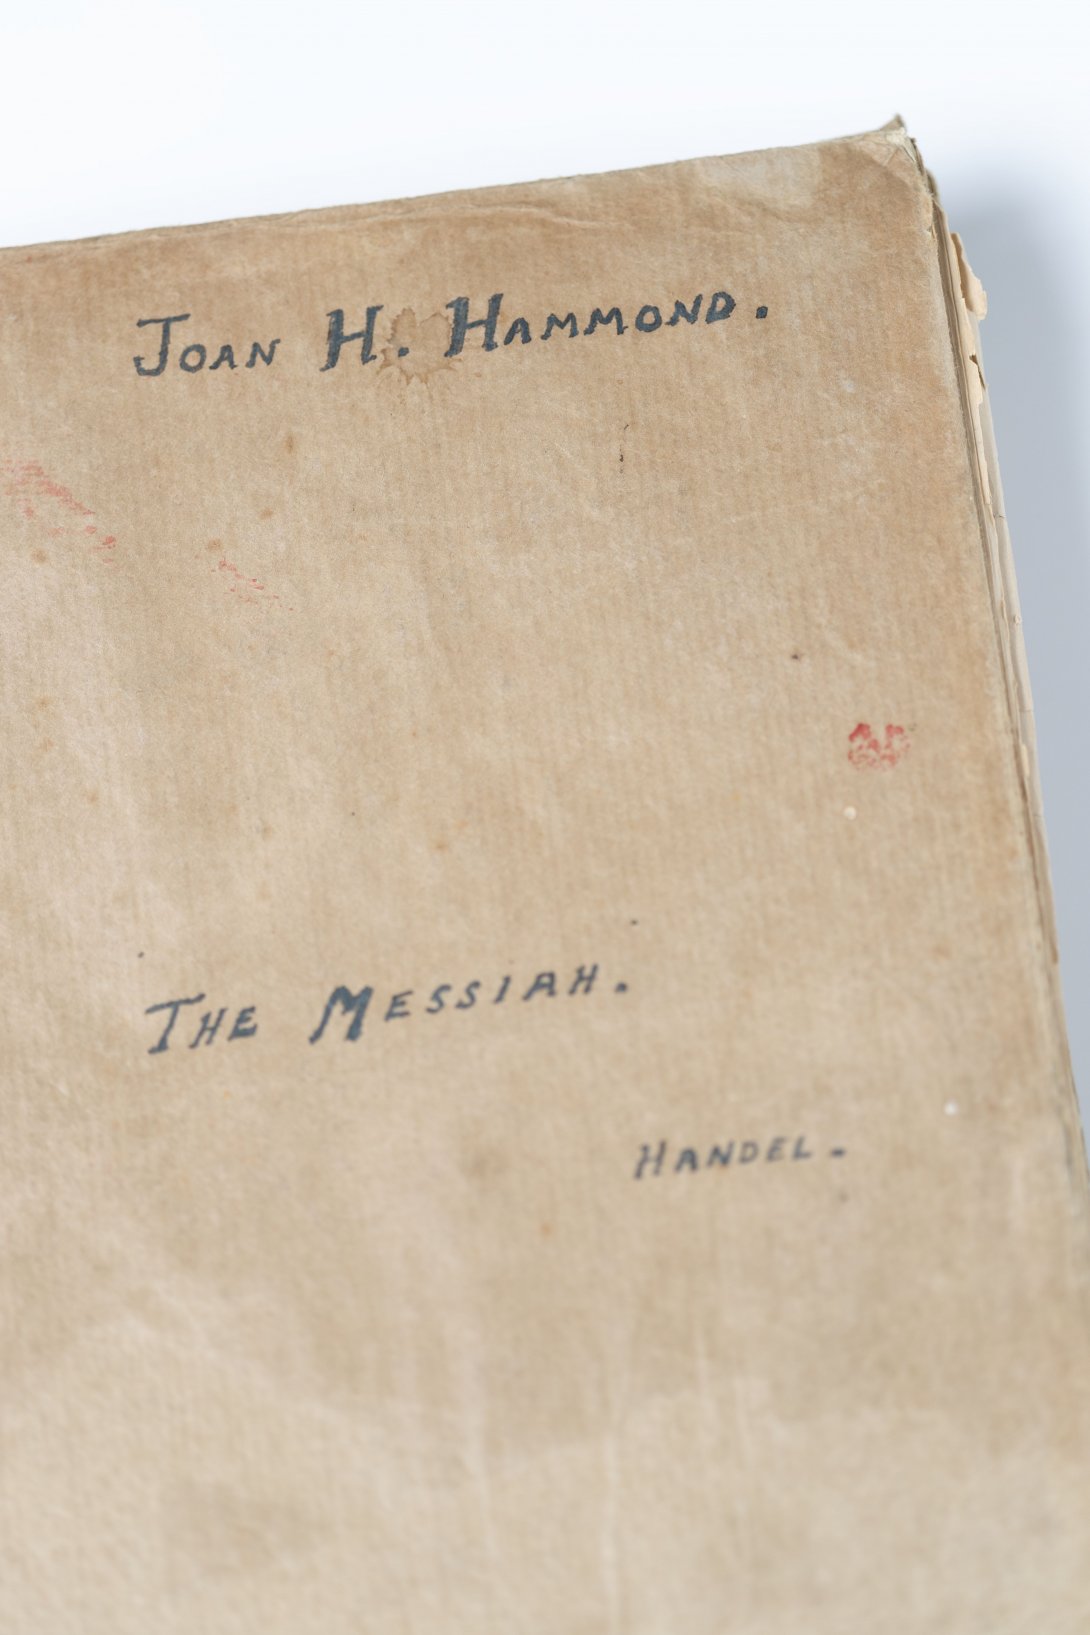 Cover of musical score. Text Joan H Hammond The Messiah.